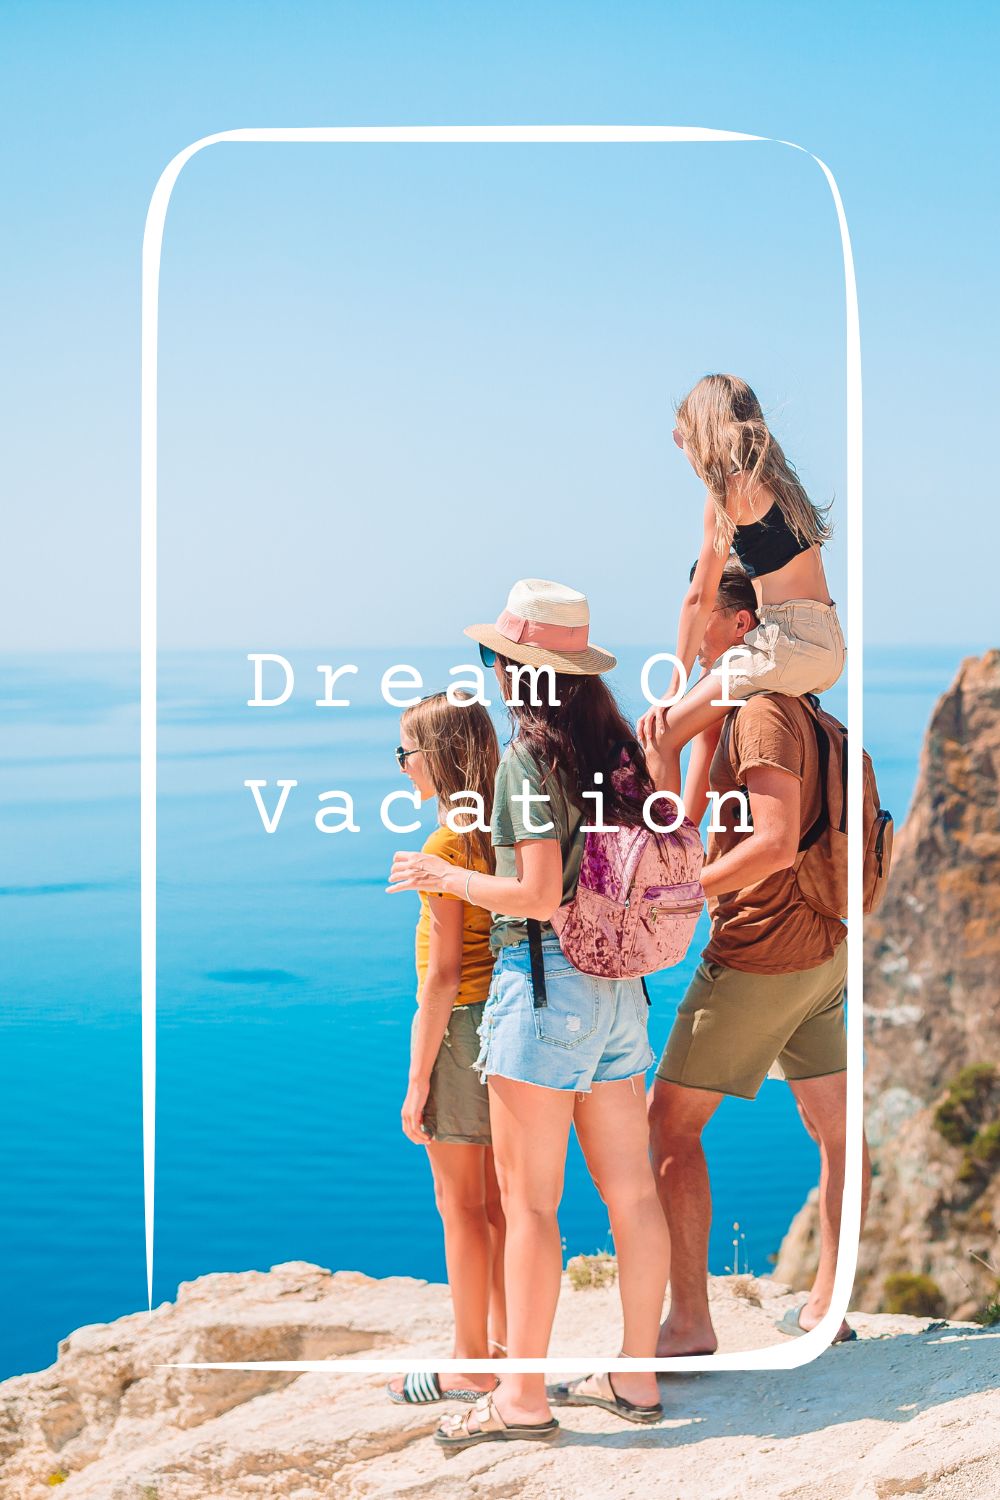 Dream Of Vacation Meanings 1